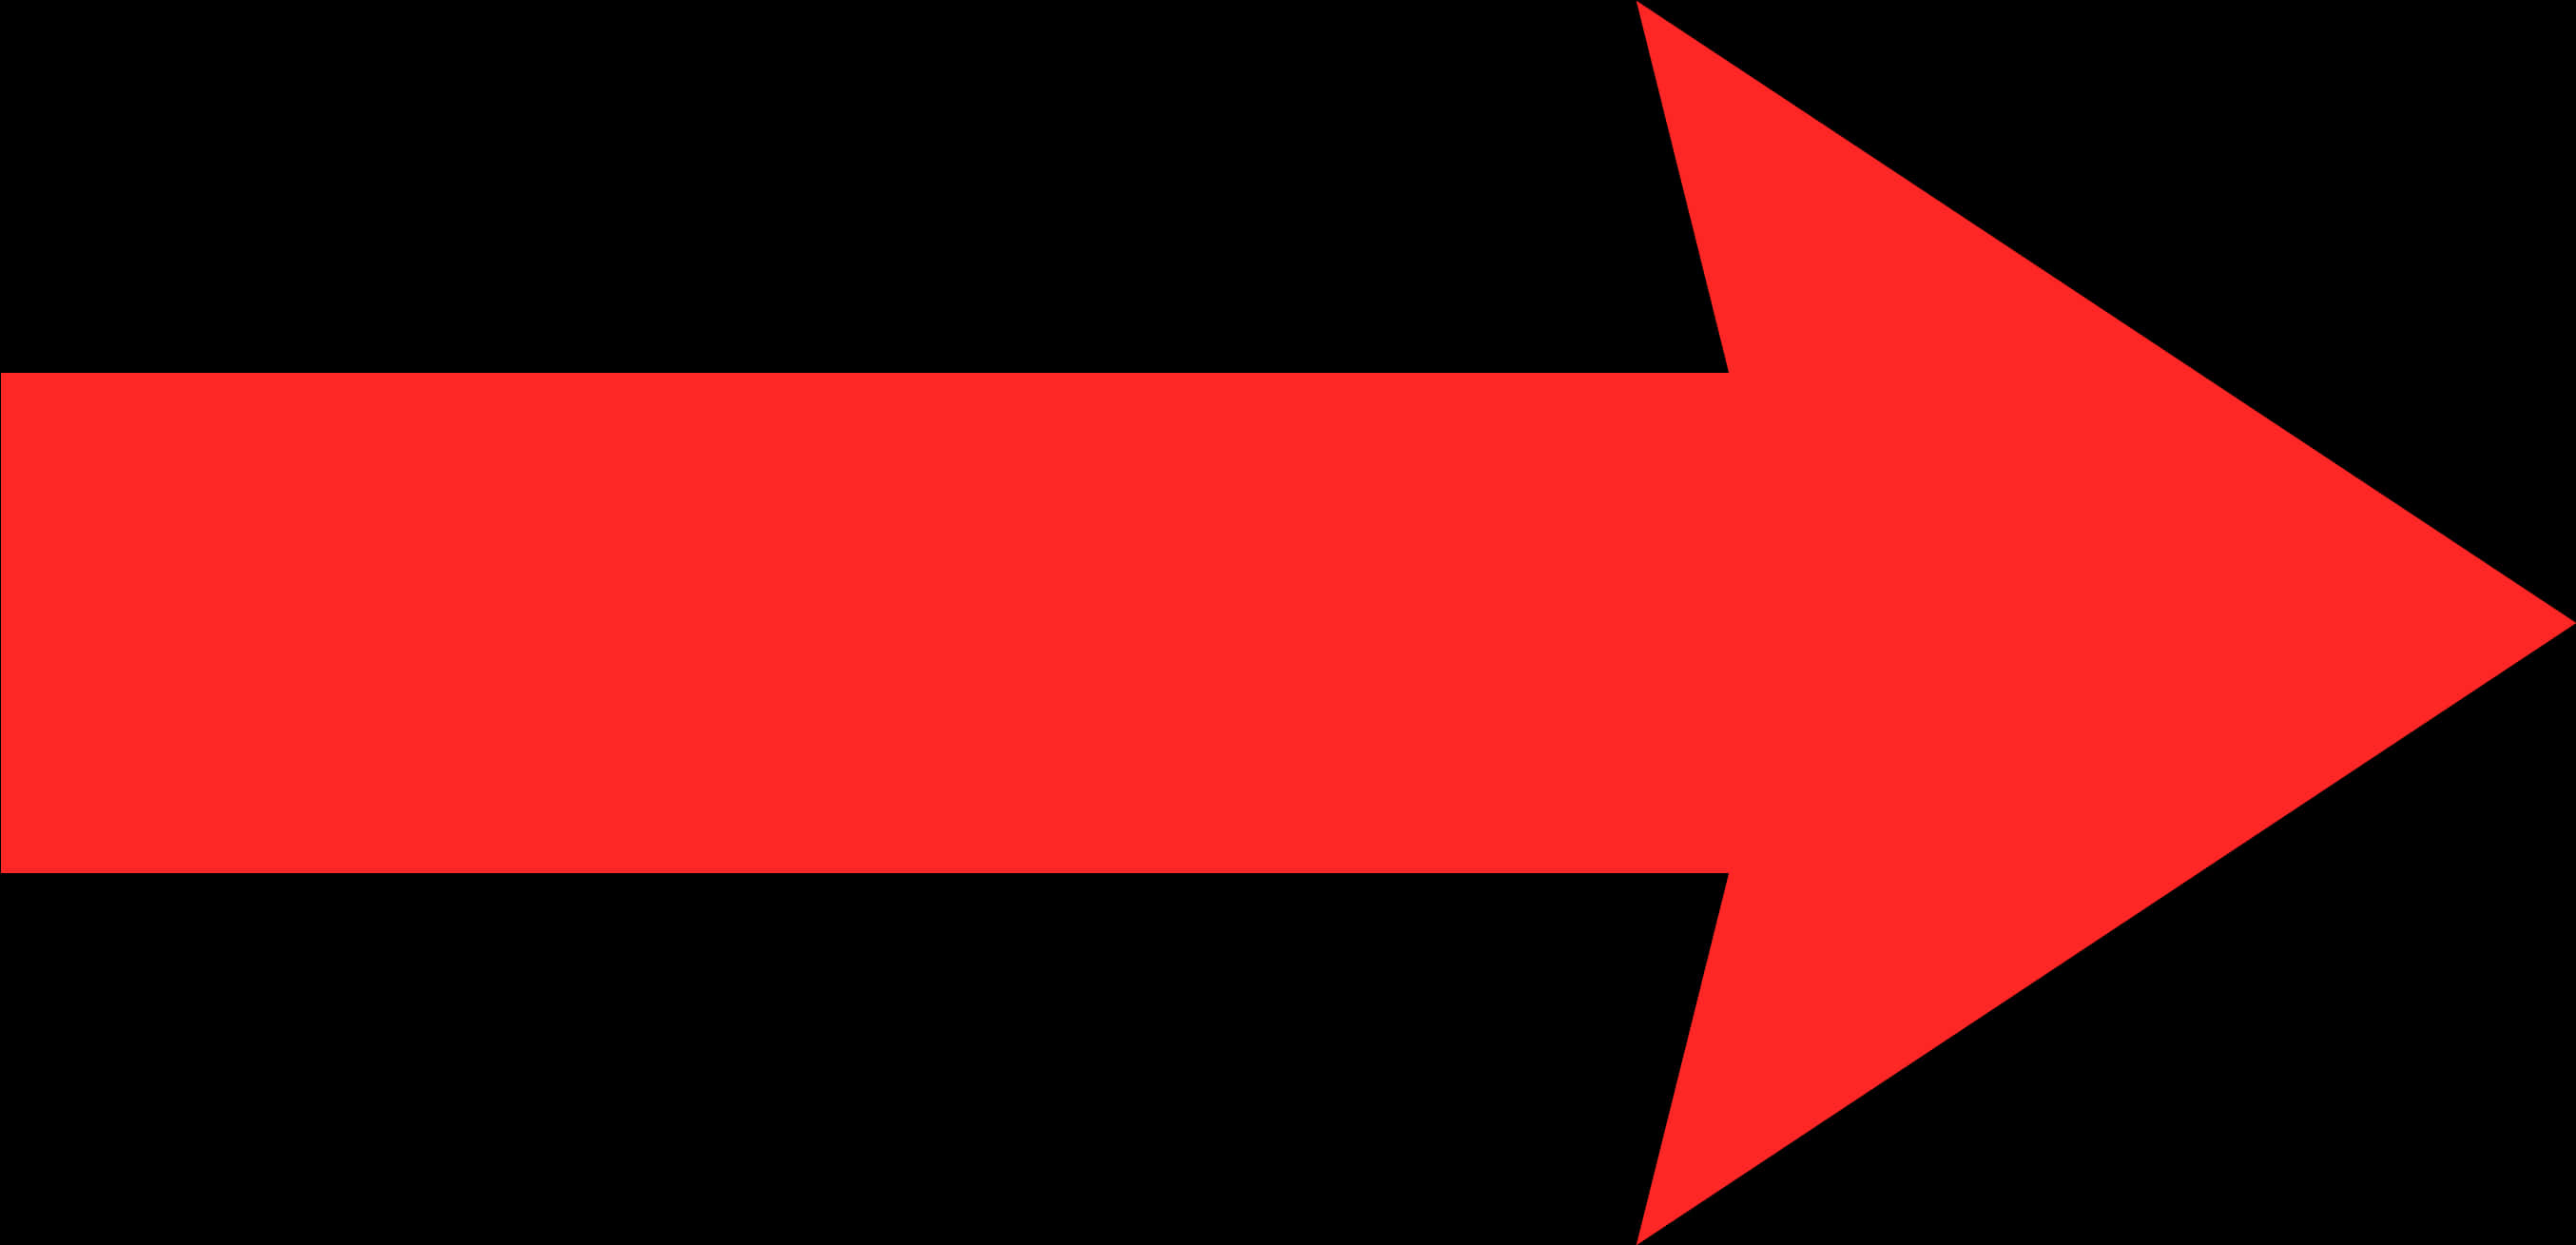 Red Arrow Graphic